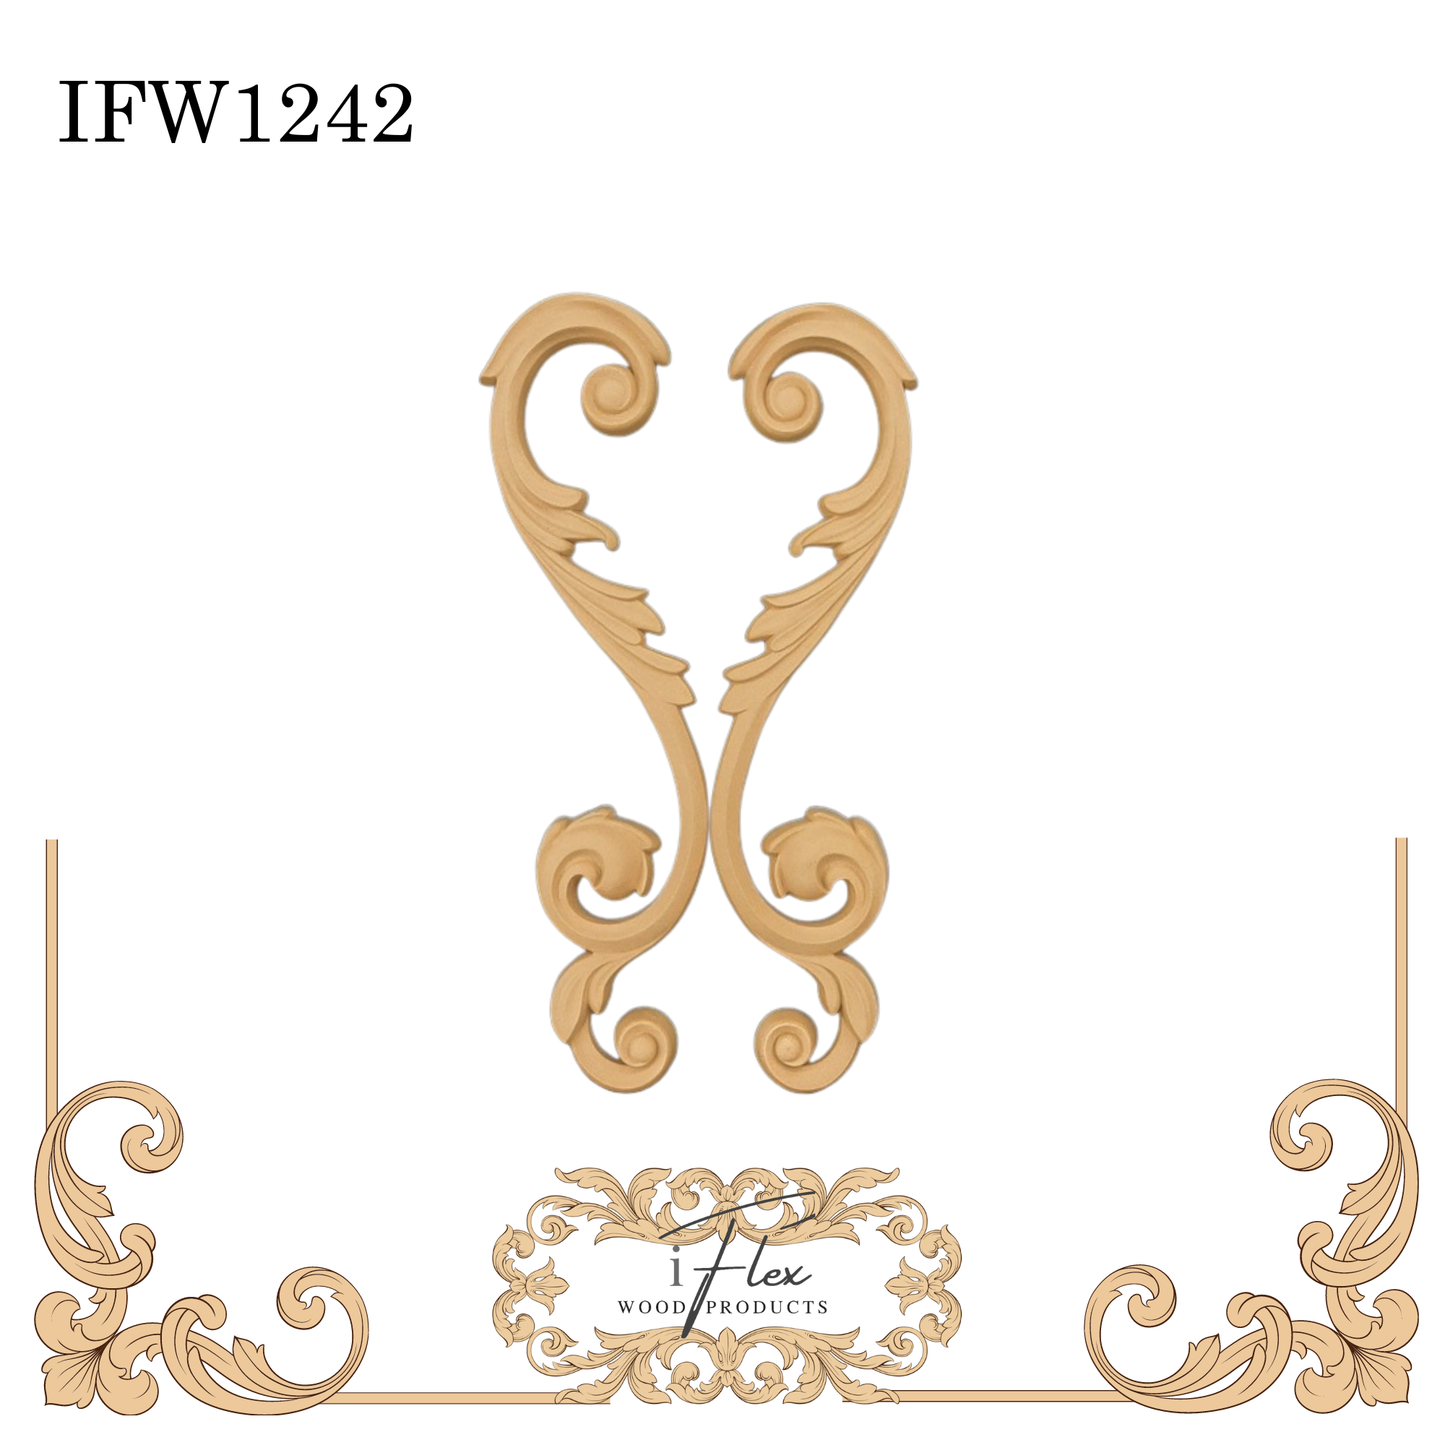 IFW 1242 iFlex Wood Products, bendable mouldings, flexible, wooden appliques, scroll pair